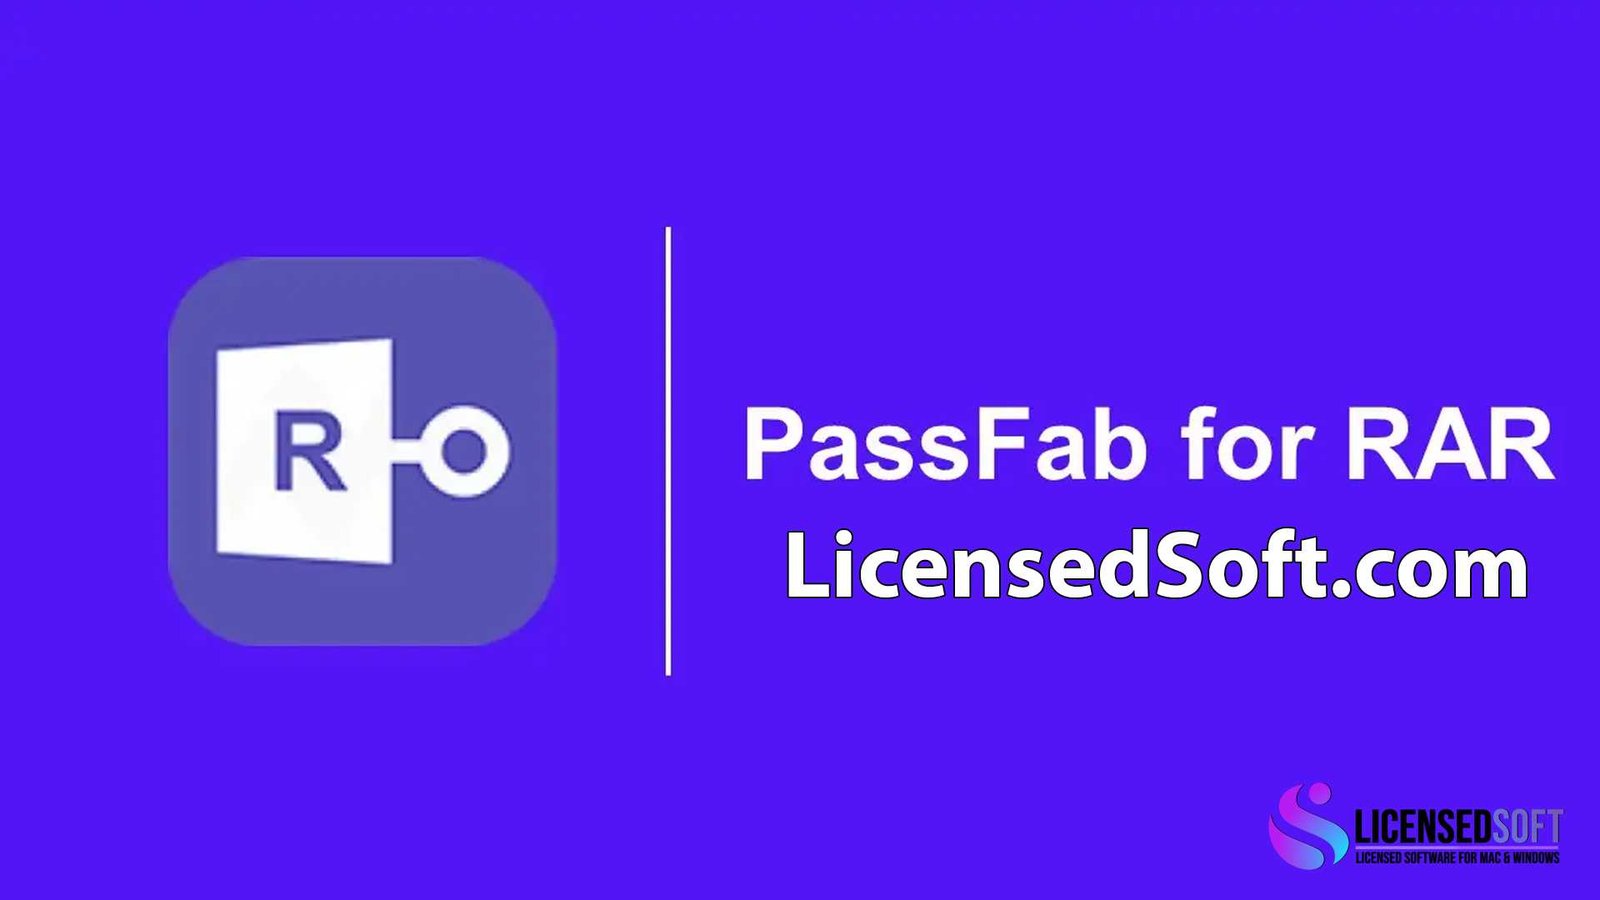 PassFab for RAR 9.5.2.2 Full Version Cover Image By LicensedSoft